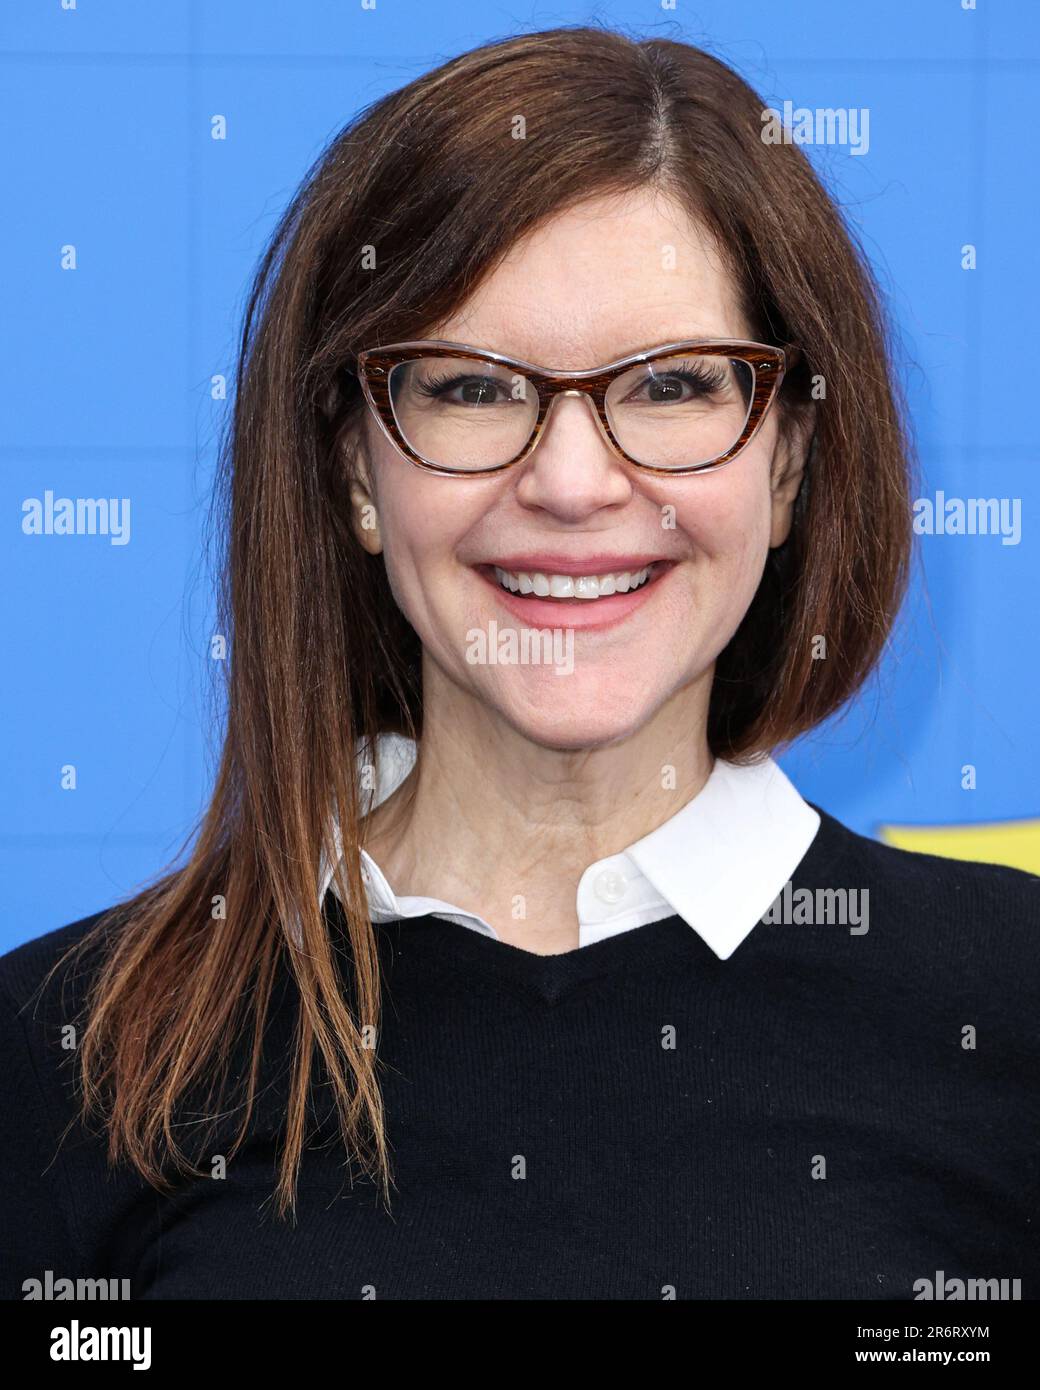 NORTH HOLLYWOOD, LOS ANGELES, CALIFORNIA, USA - JUNE 10: American singer-songwriter, musician, author and actress Lisa Loeb arrives at Apple TV+'s 'Ted Lasso' Season 3 FYC Red Carpet held at the Saban Media Center at the Television Academy on June 10, 2023 in North Hollywood, Los Angeles, California, United States. (Photo by Xavier Collin/Image Press Agency) Stock Photo